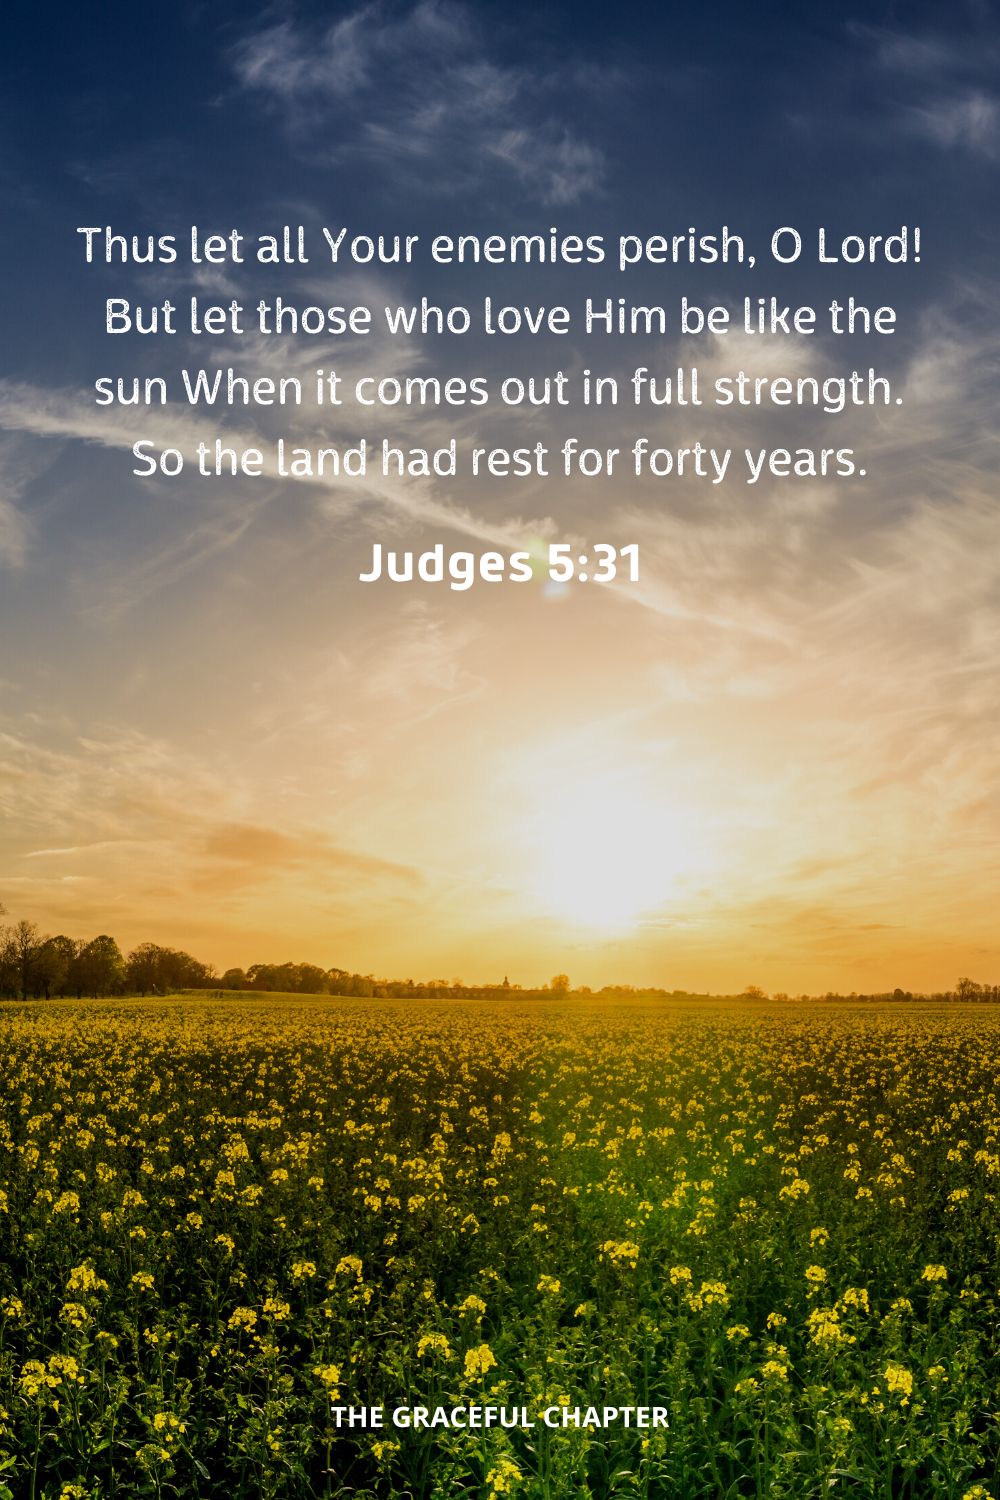 Thus let all Your enemies perish, O Lord! But let those who love Him be like the sun When it comes out in full strength.” So the land had rest for forty years.